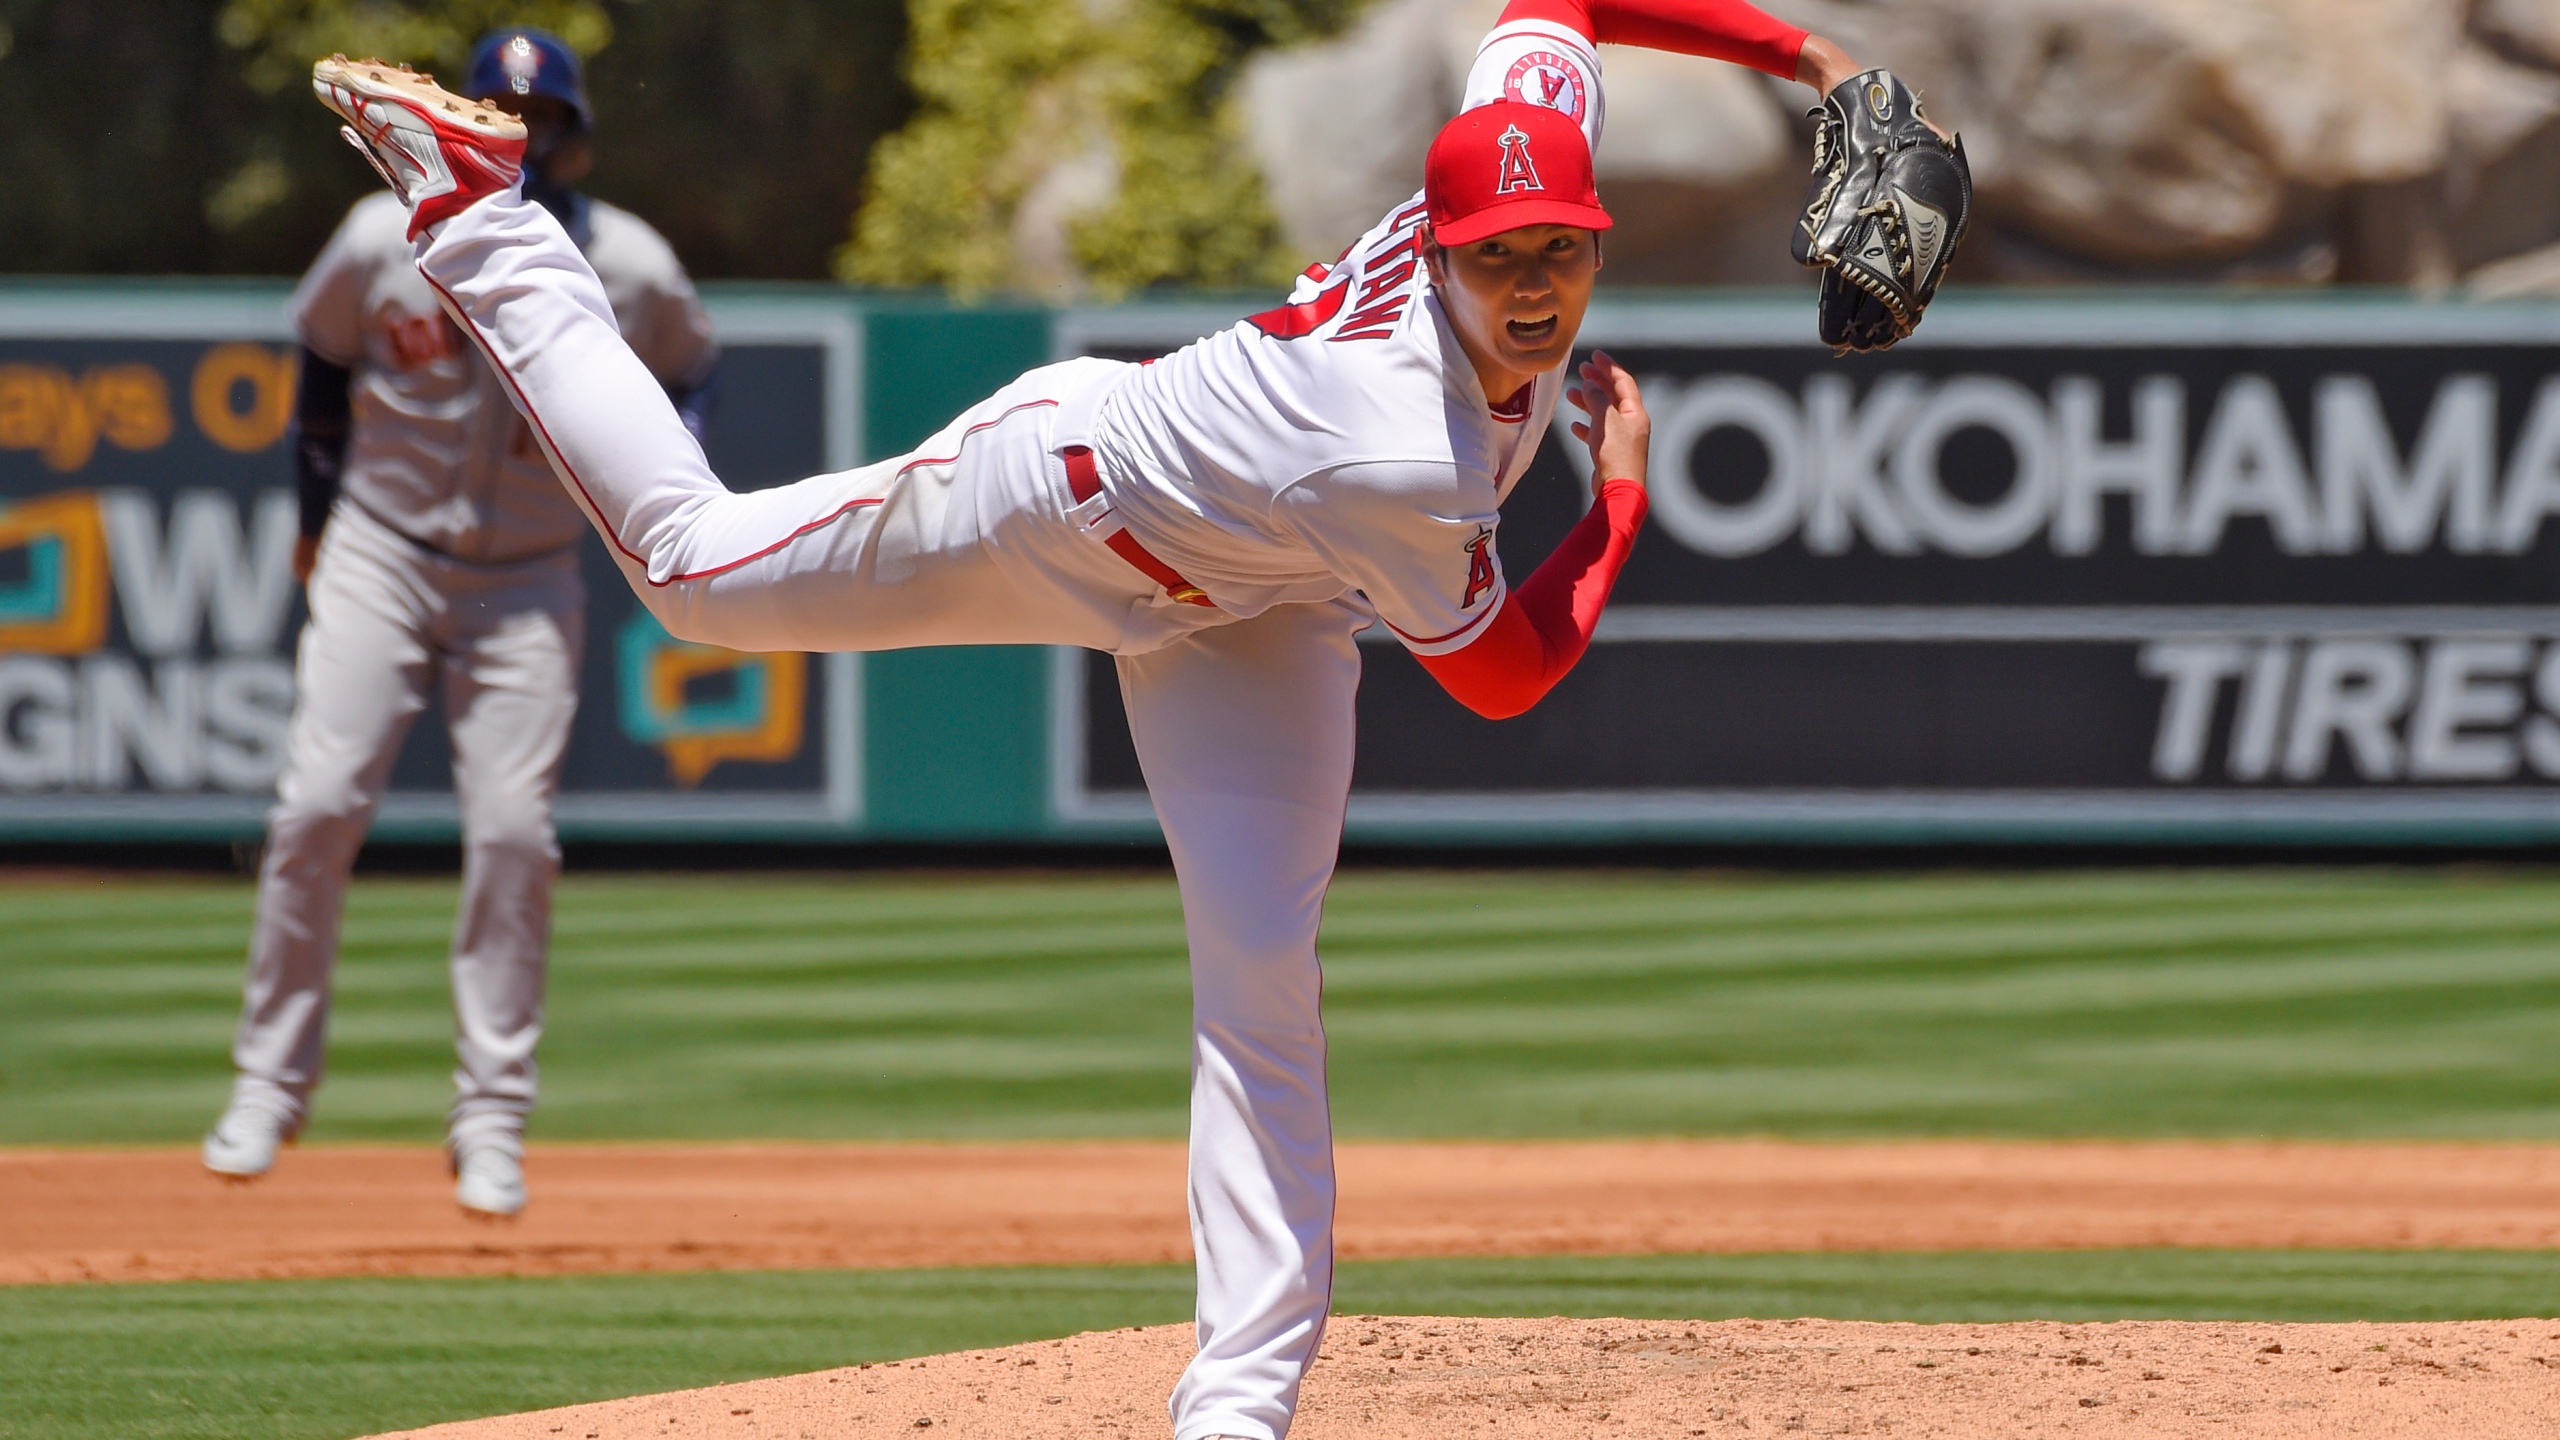 Maddon shohei ohtani wont pitch again for angels this year â klbk kamc